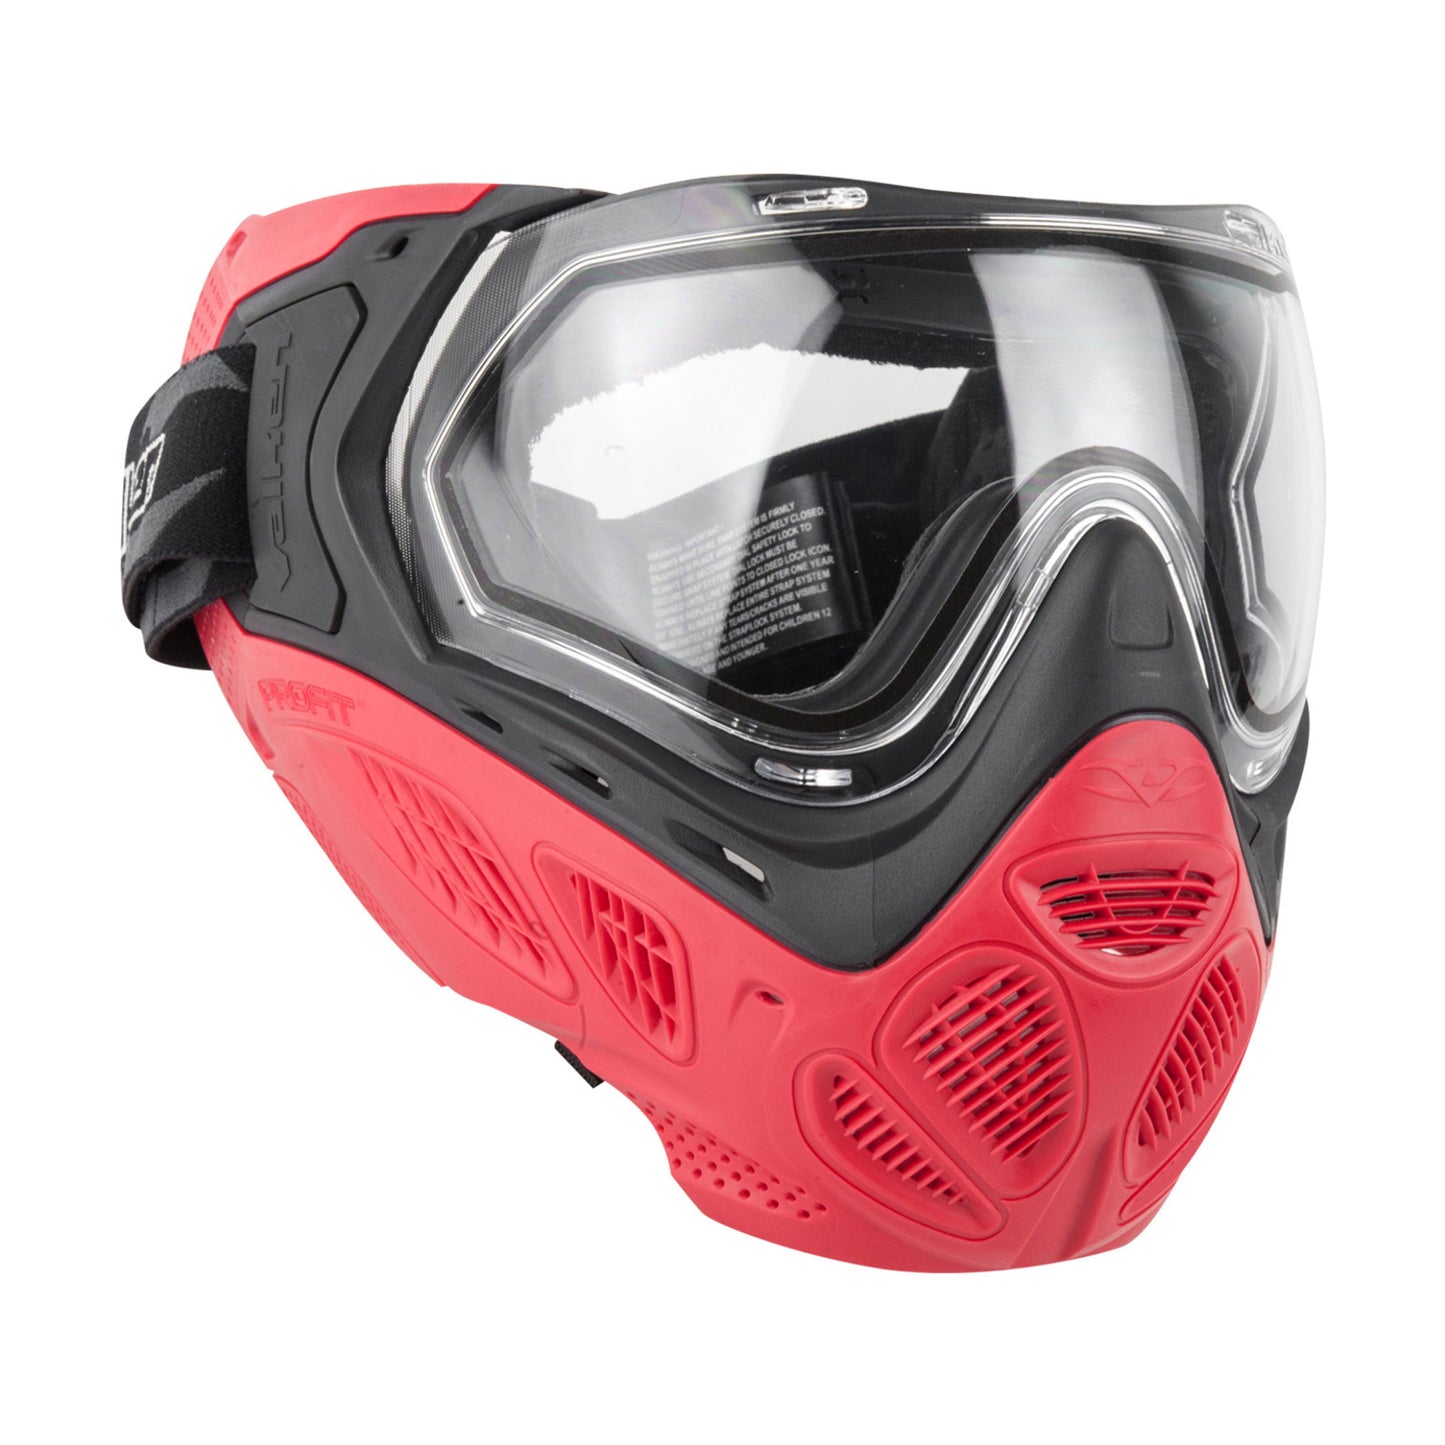 Valken Sly Profit SC Goggle- Red/Black - Sly Equipment